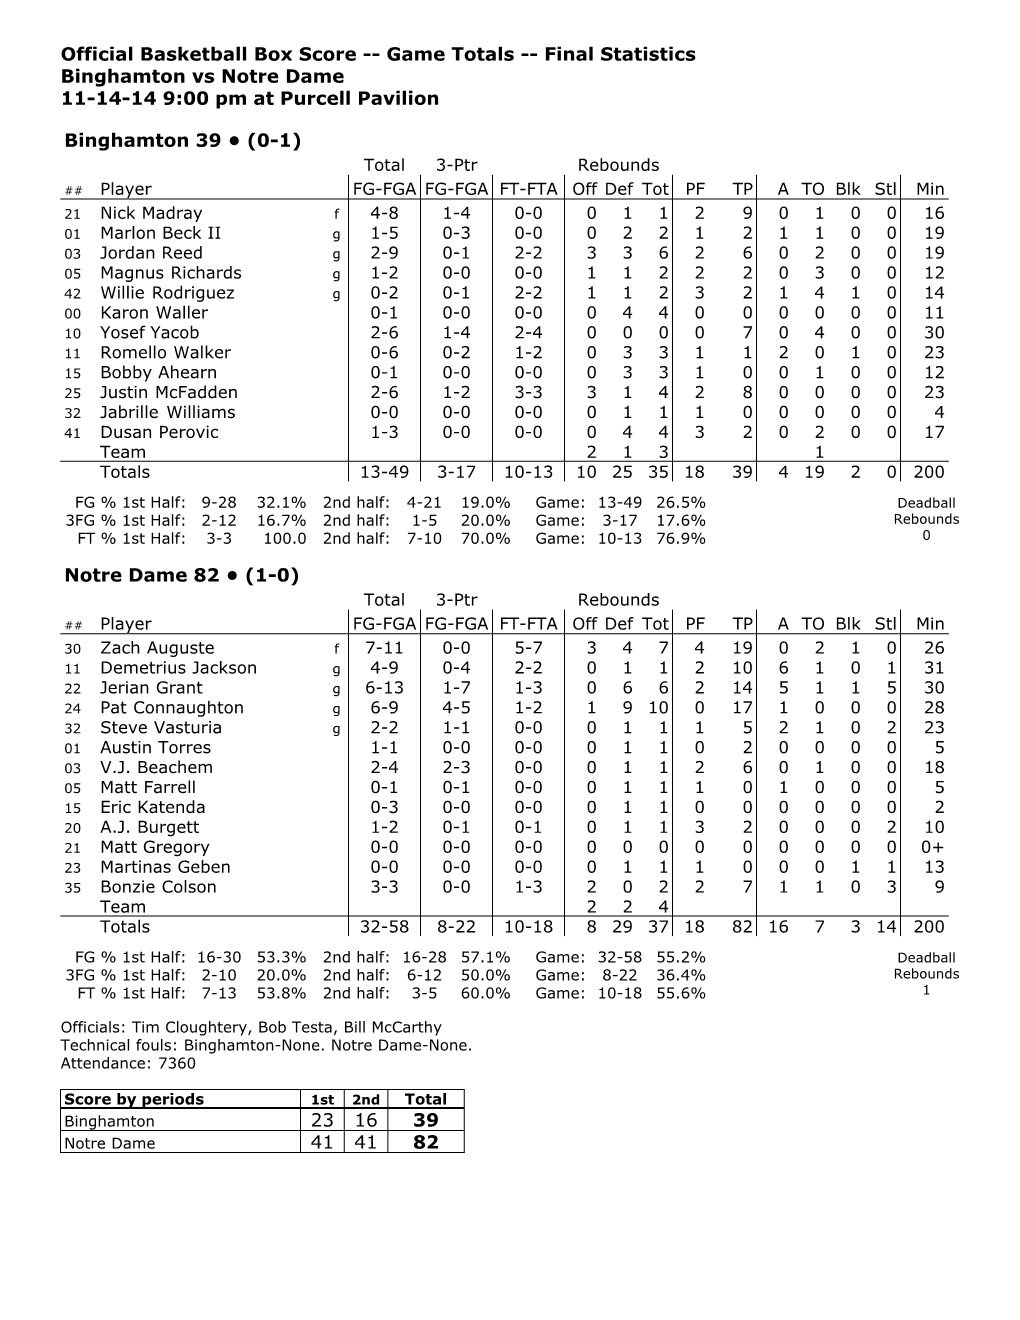 Official Basketball Box Score -- Game Totals -- Final Statistics Binghamton Vs Notre Dame 11-14-14 9:00 Pm at Purcell Pavilion